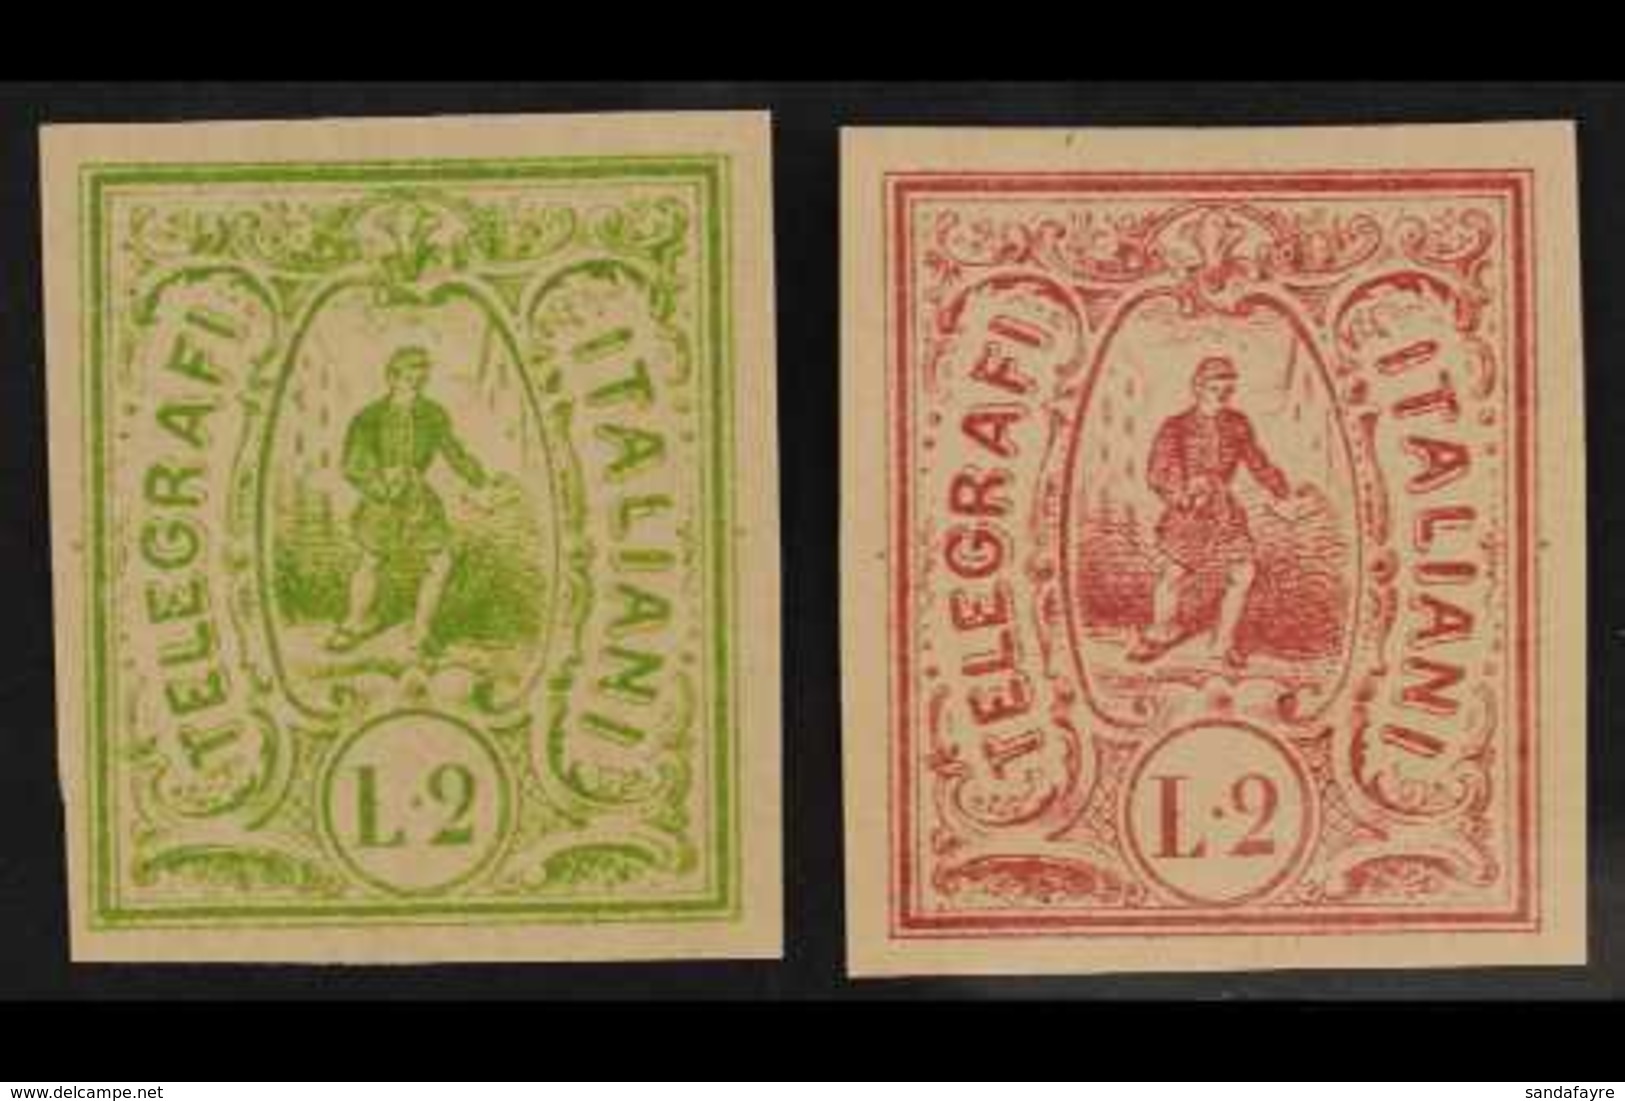 ESSAYS TELEGRAPHS 1863 2L 'Telegrafi Italiani' Postman Unapproved Imperf Essays Printed In Two Different Colours On Ungu - Non Classés